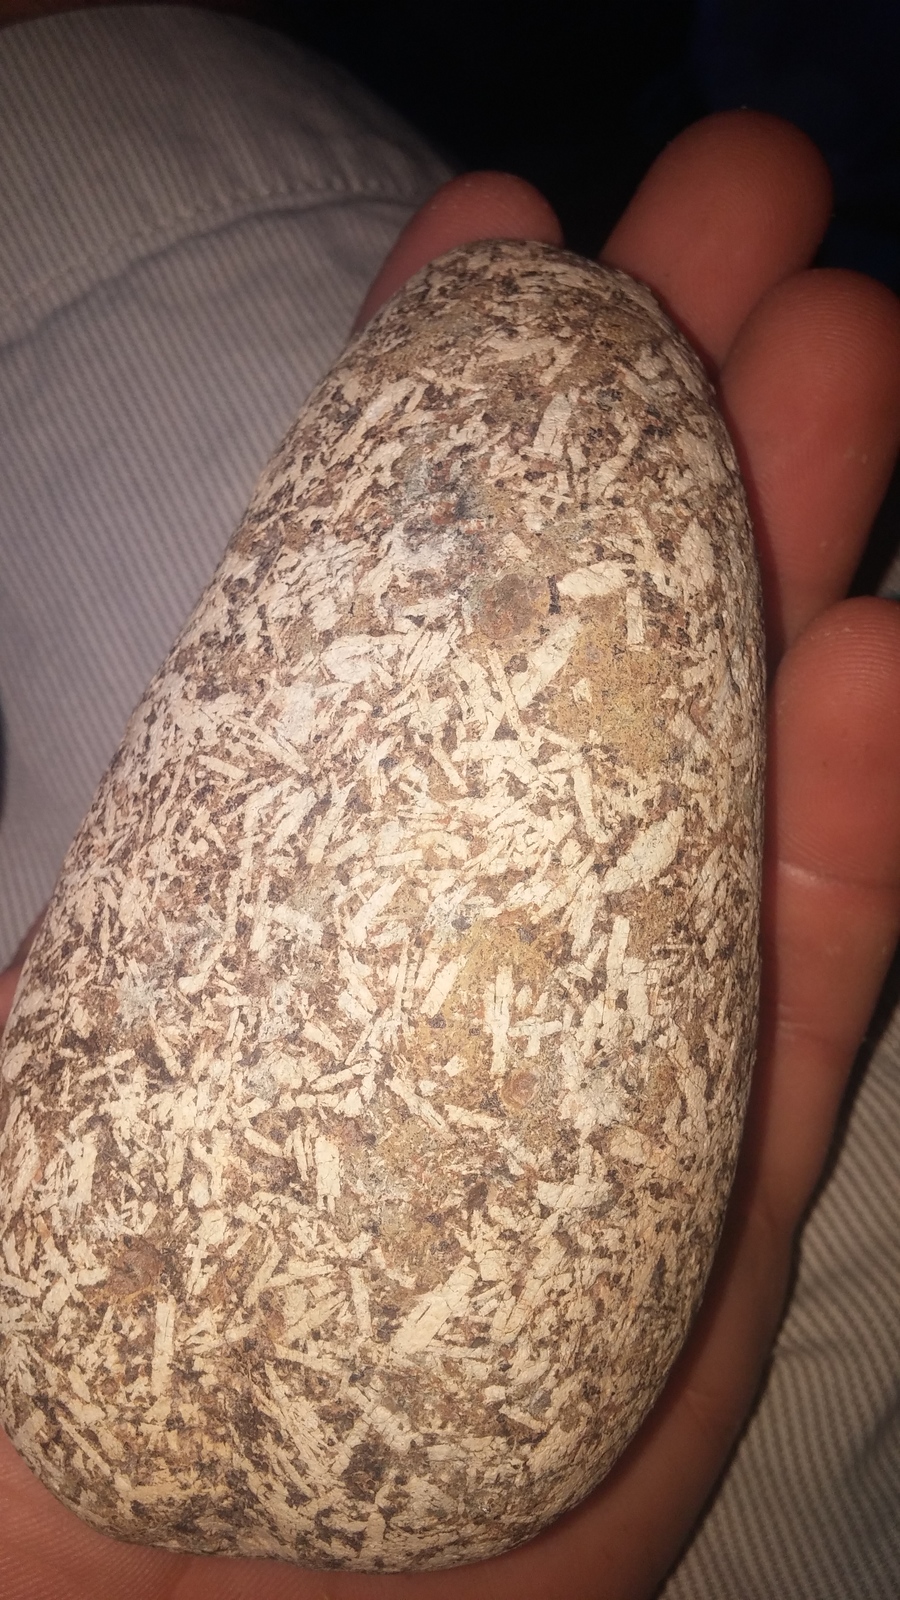 Does This Rock Have Fossils Inside? I Picked Up This Rock ...